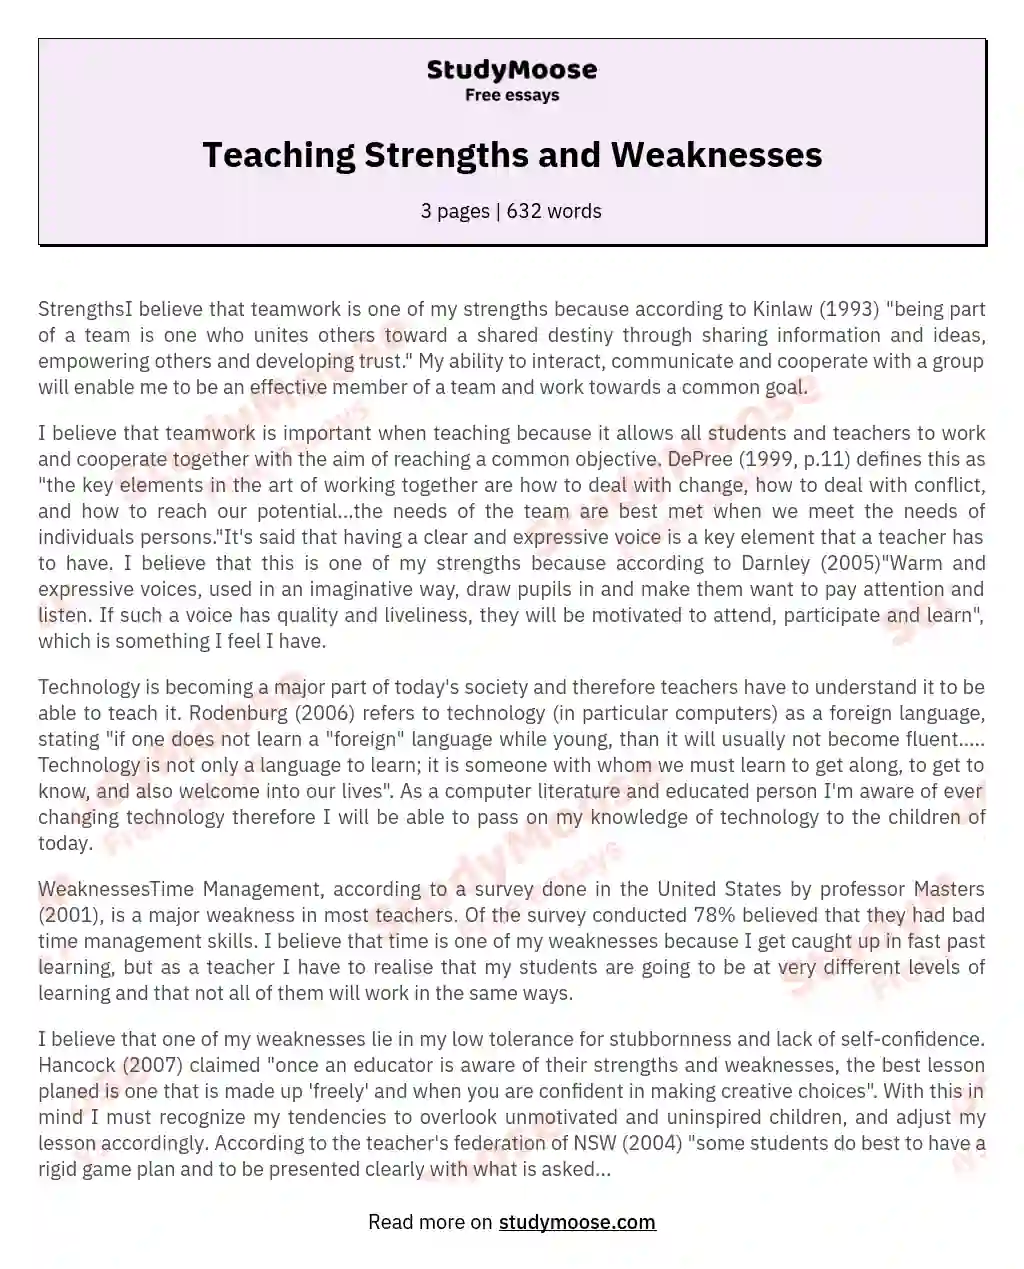 Teaching Strengths and Weaknesses essay